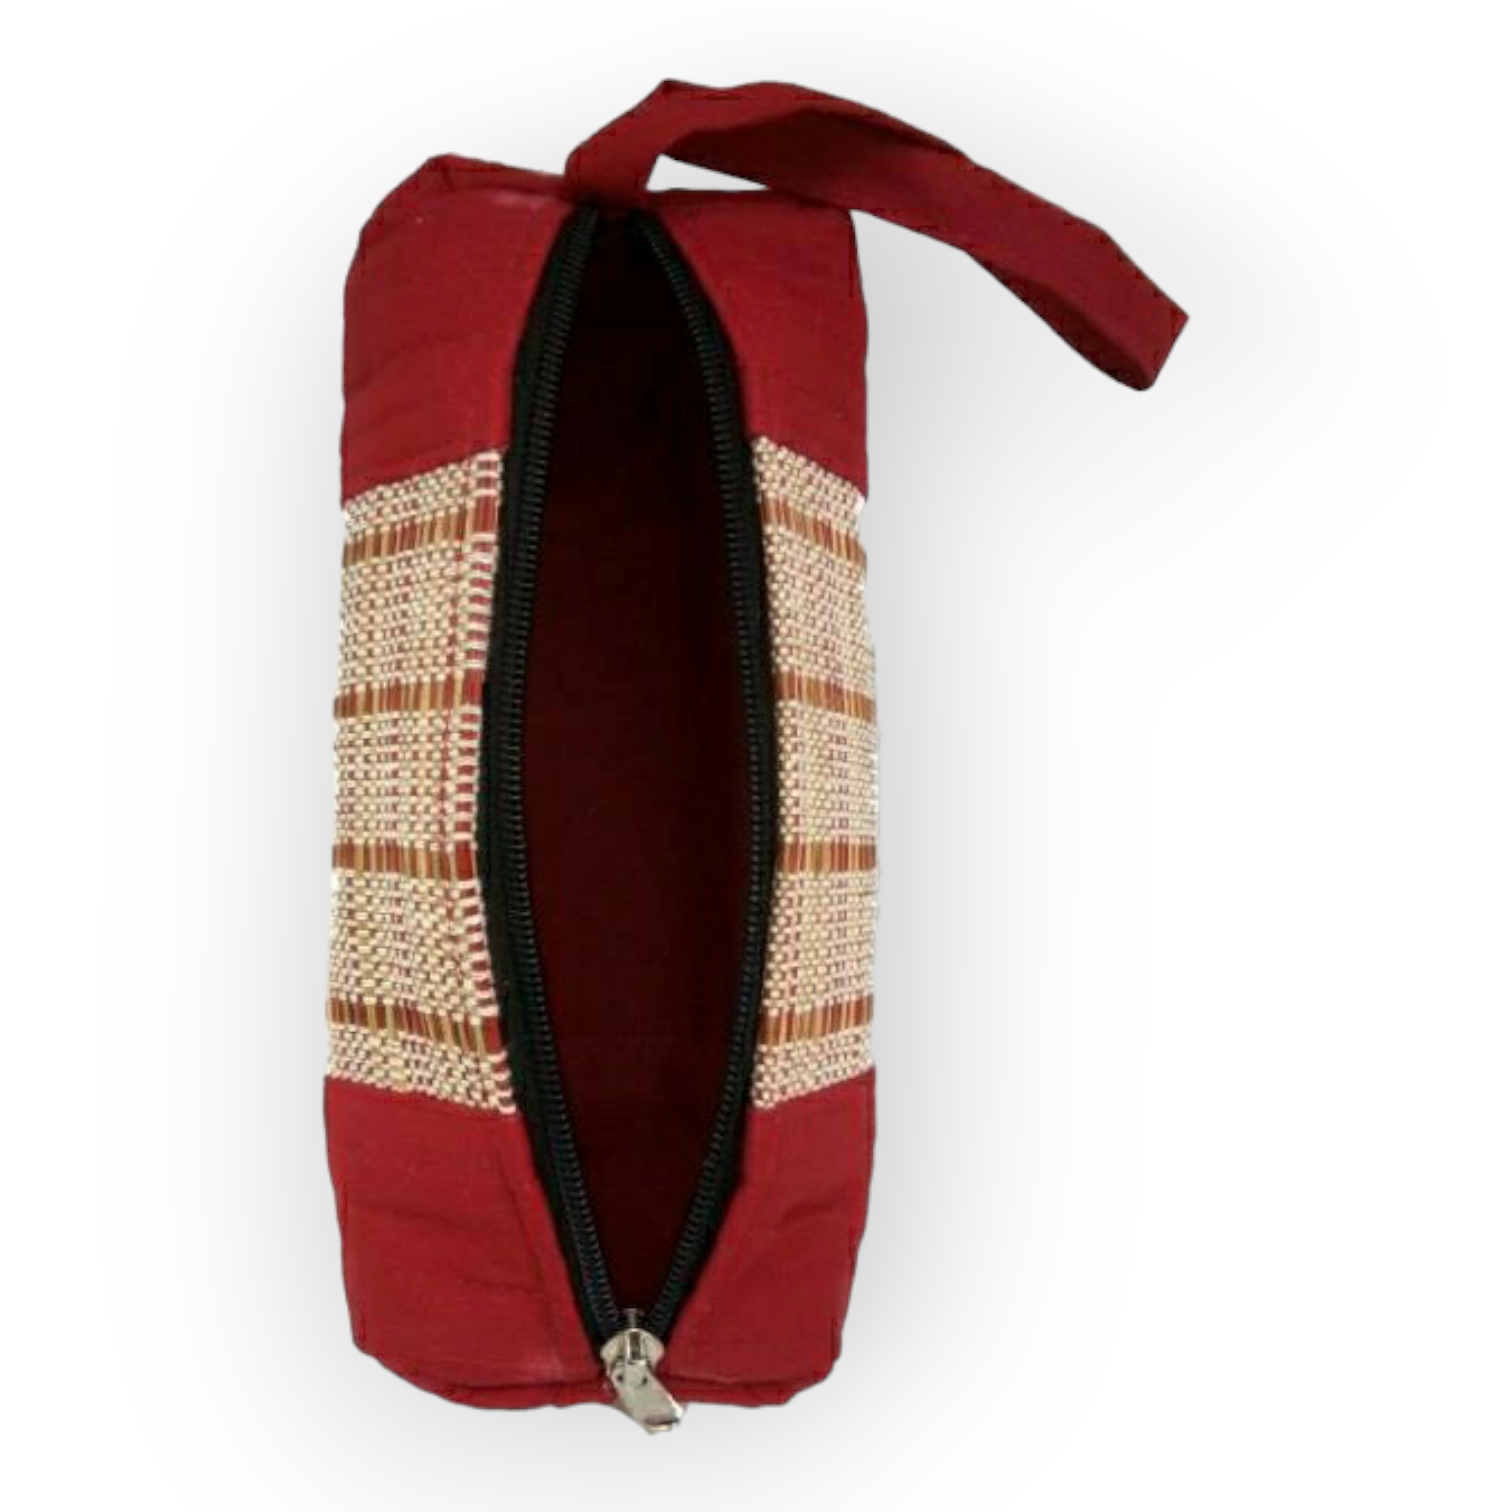 Madur Kathi Pouch in Maroon Colour - 0